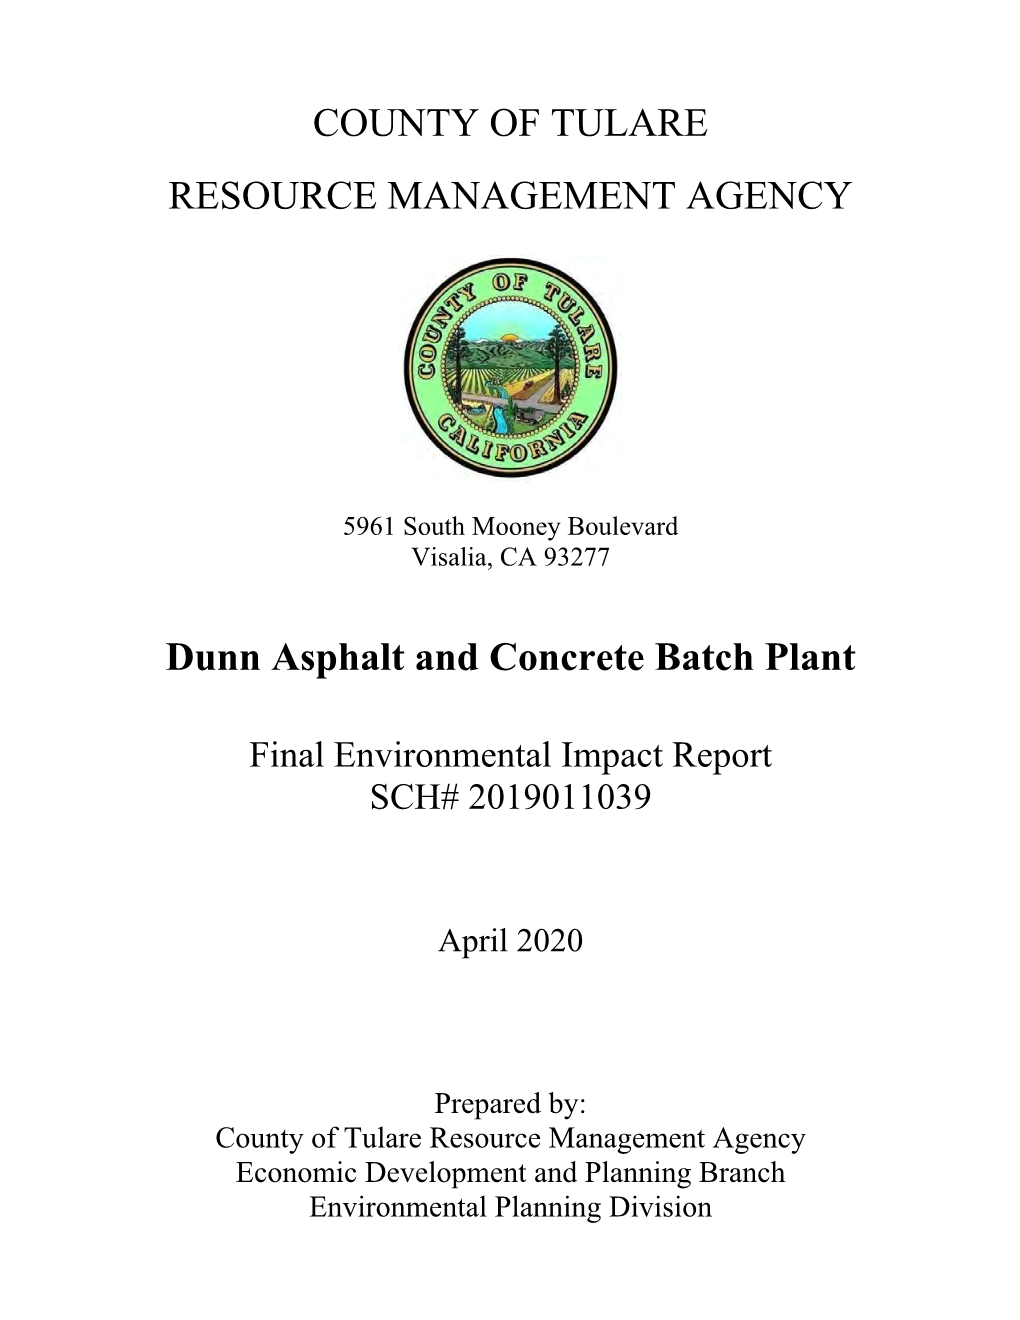 Final Environmental Impact Report for the Dunn Asphalt and Concrete Batch Plant Project